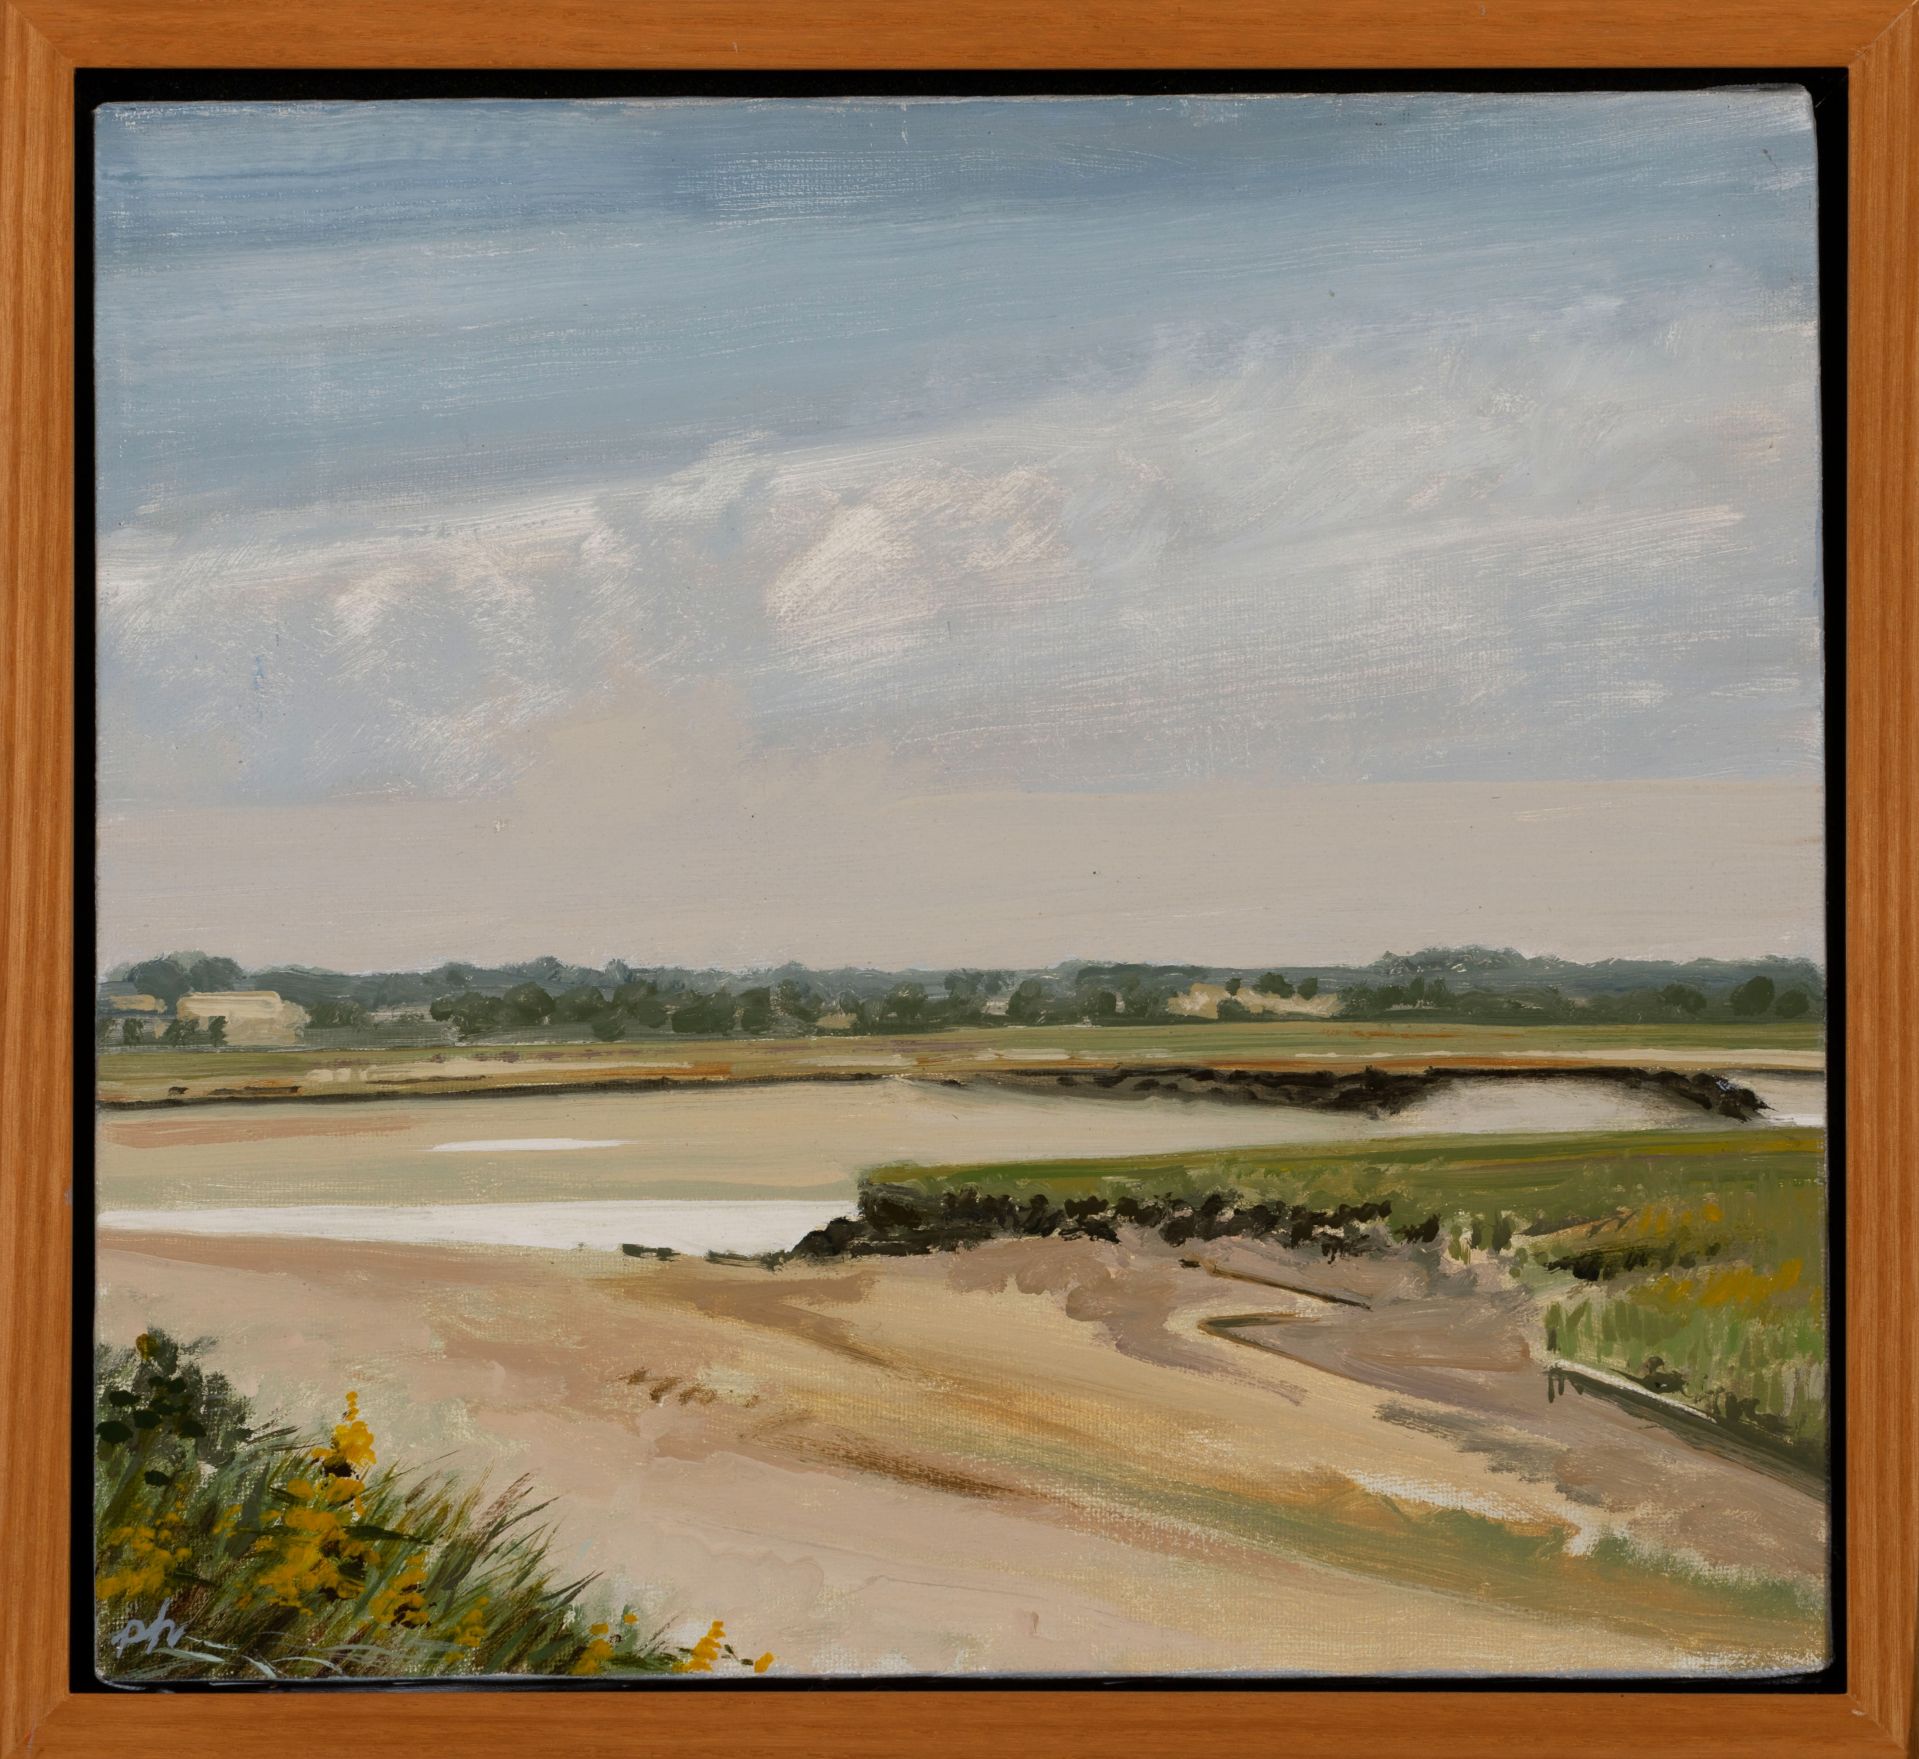 Pat Hardy, Inlet at Drake’s Island, 1986, oil on canvas, 2020.1.21